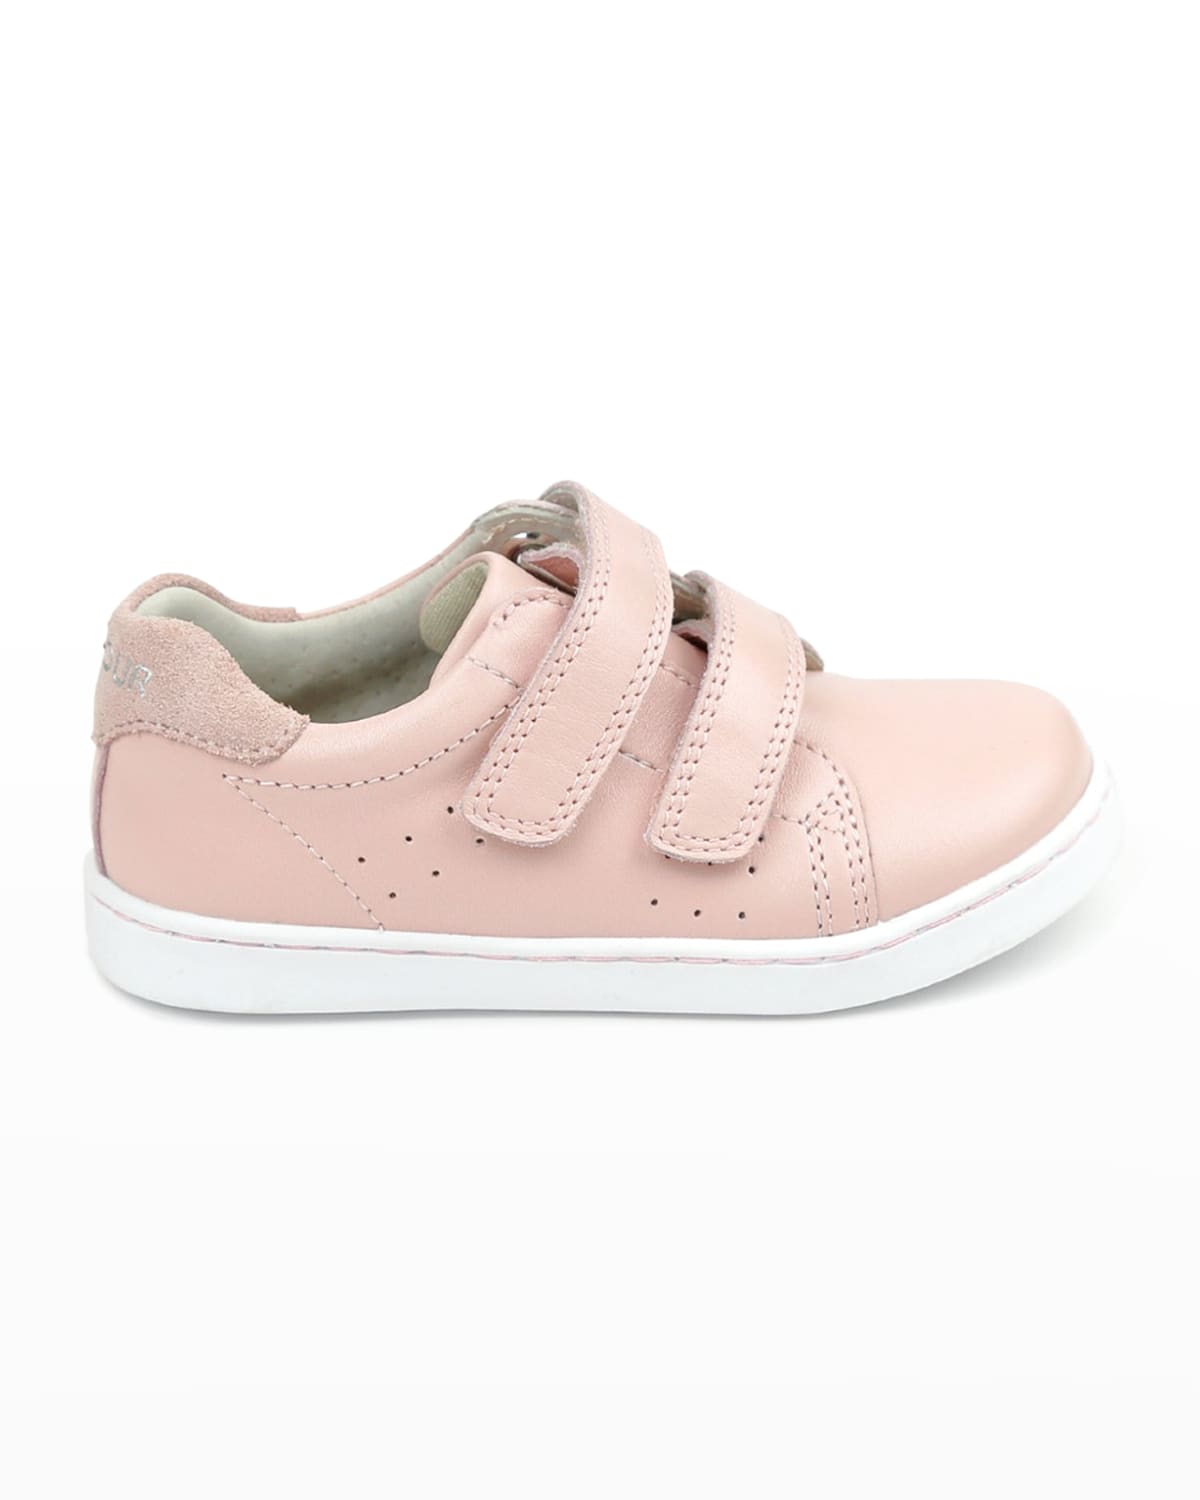 L'amour Shoes Girls' Kenzie Double Hook-and-loop Sneaker - Toddler, Little Kid In Pink